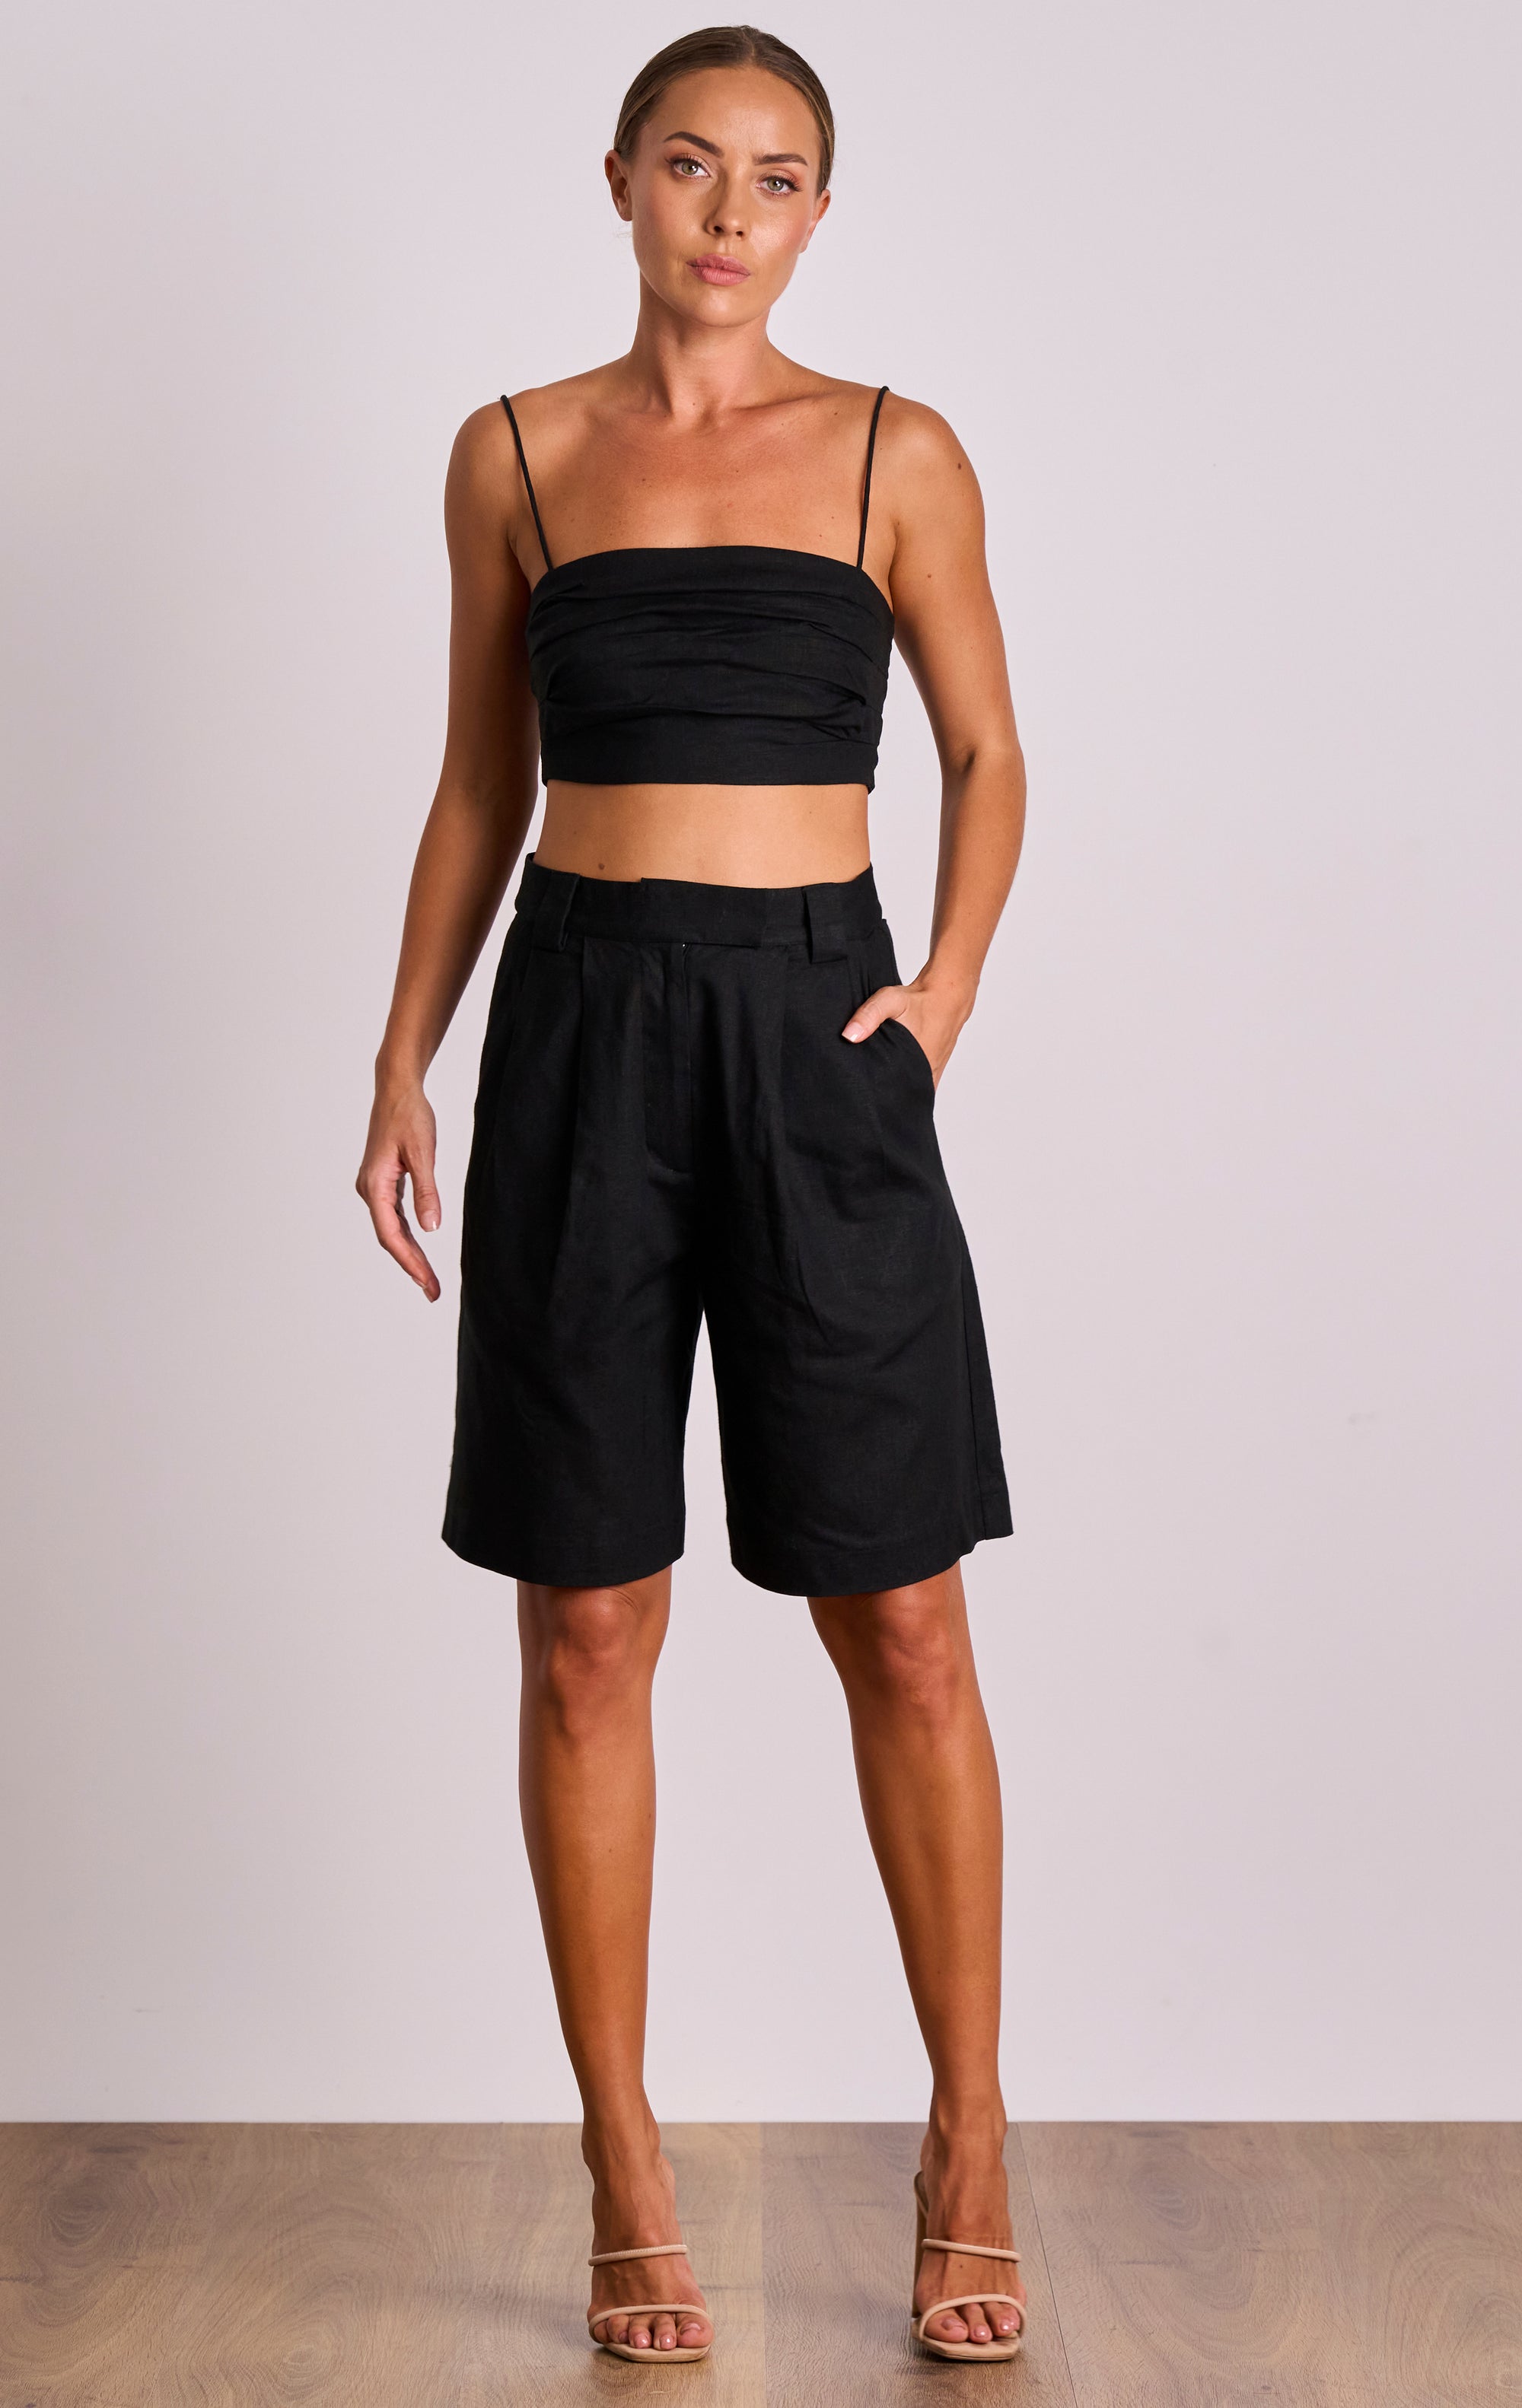 Sojourn Crop Top - TAKE 40% OFF DISCOUNT APPLIED AT CHECKOUT